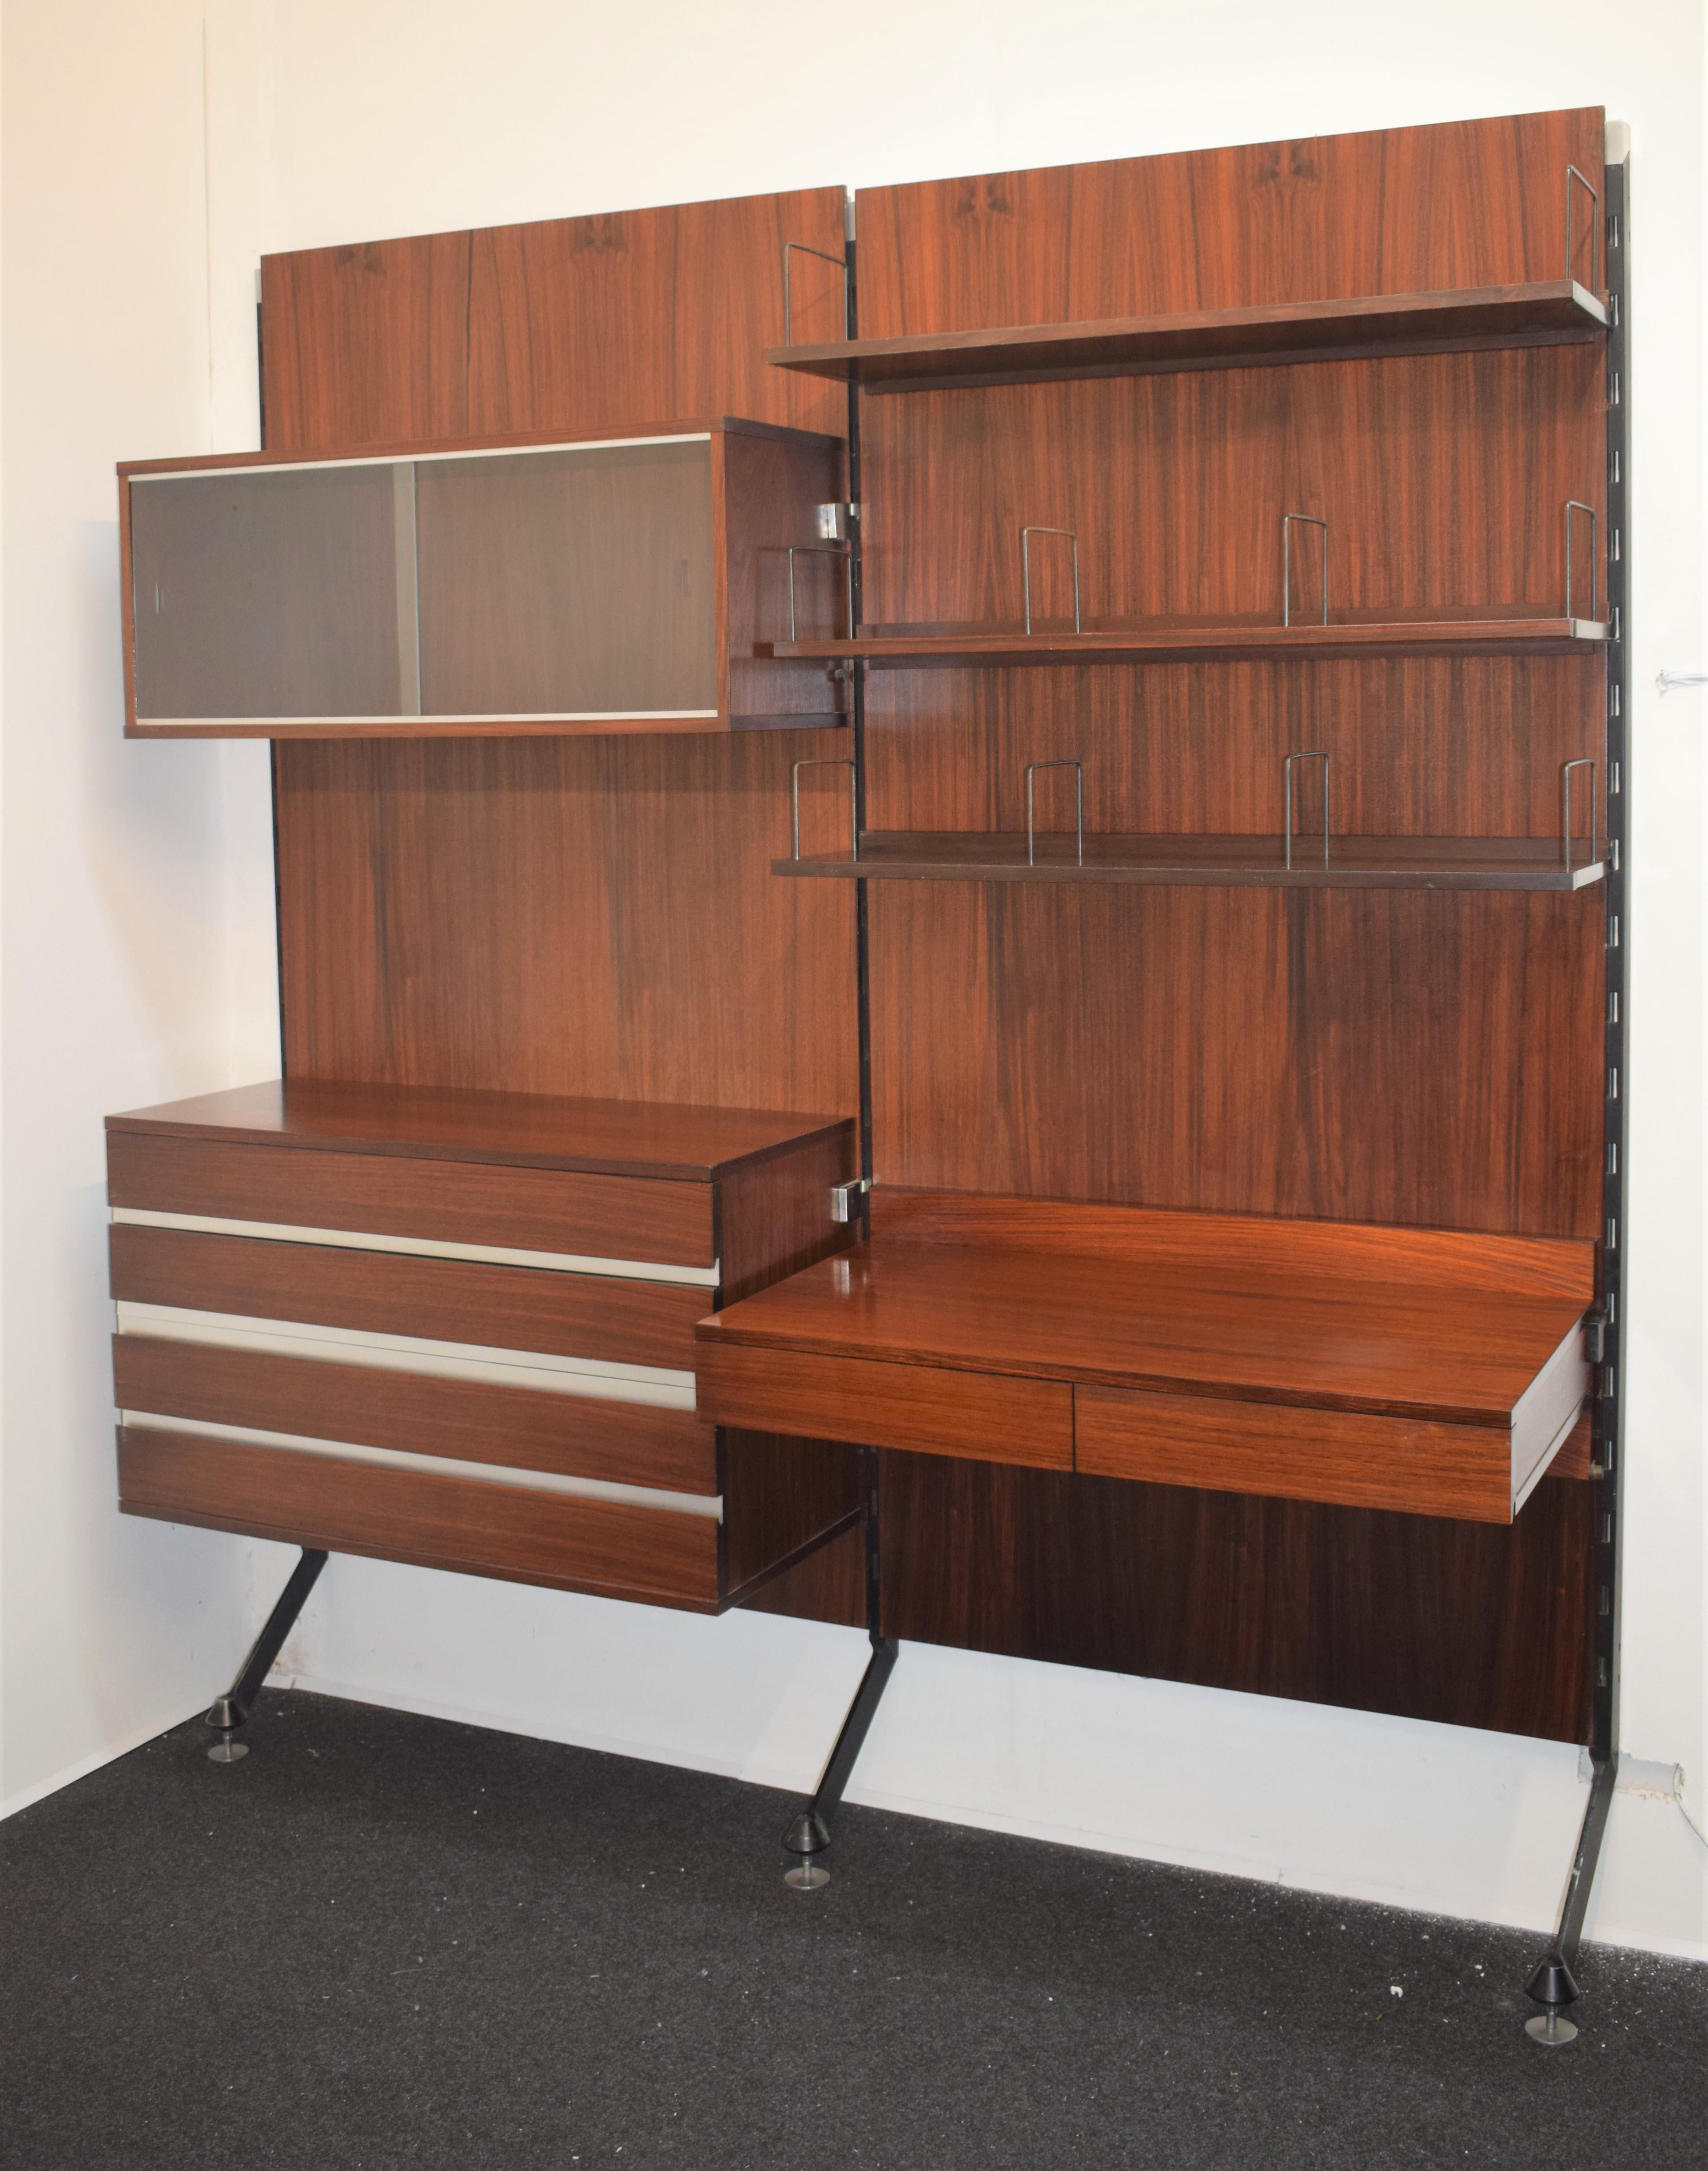 Italian wall unit by Ico Parisi for MIM Roma, 1960s.

Dimensions: H= 220 cm; W= 200 cm; D= 55 cm;
Chair: H= 80 cm; W= 42 cm; D= 40 cm; Height seat = 42 cm.